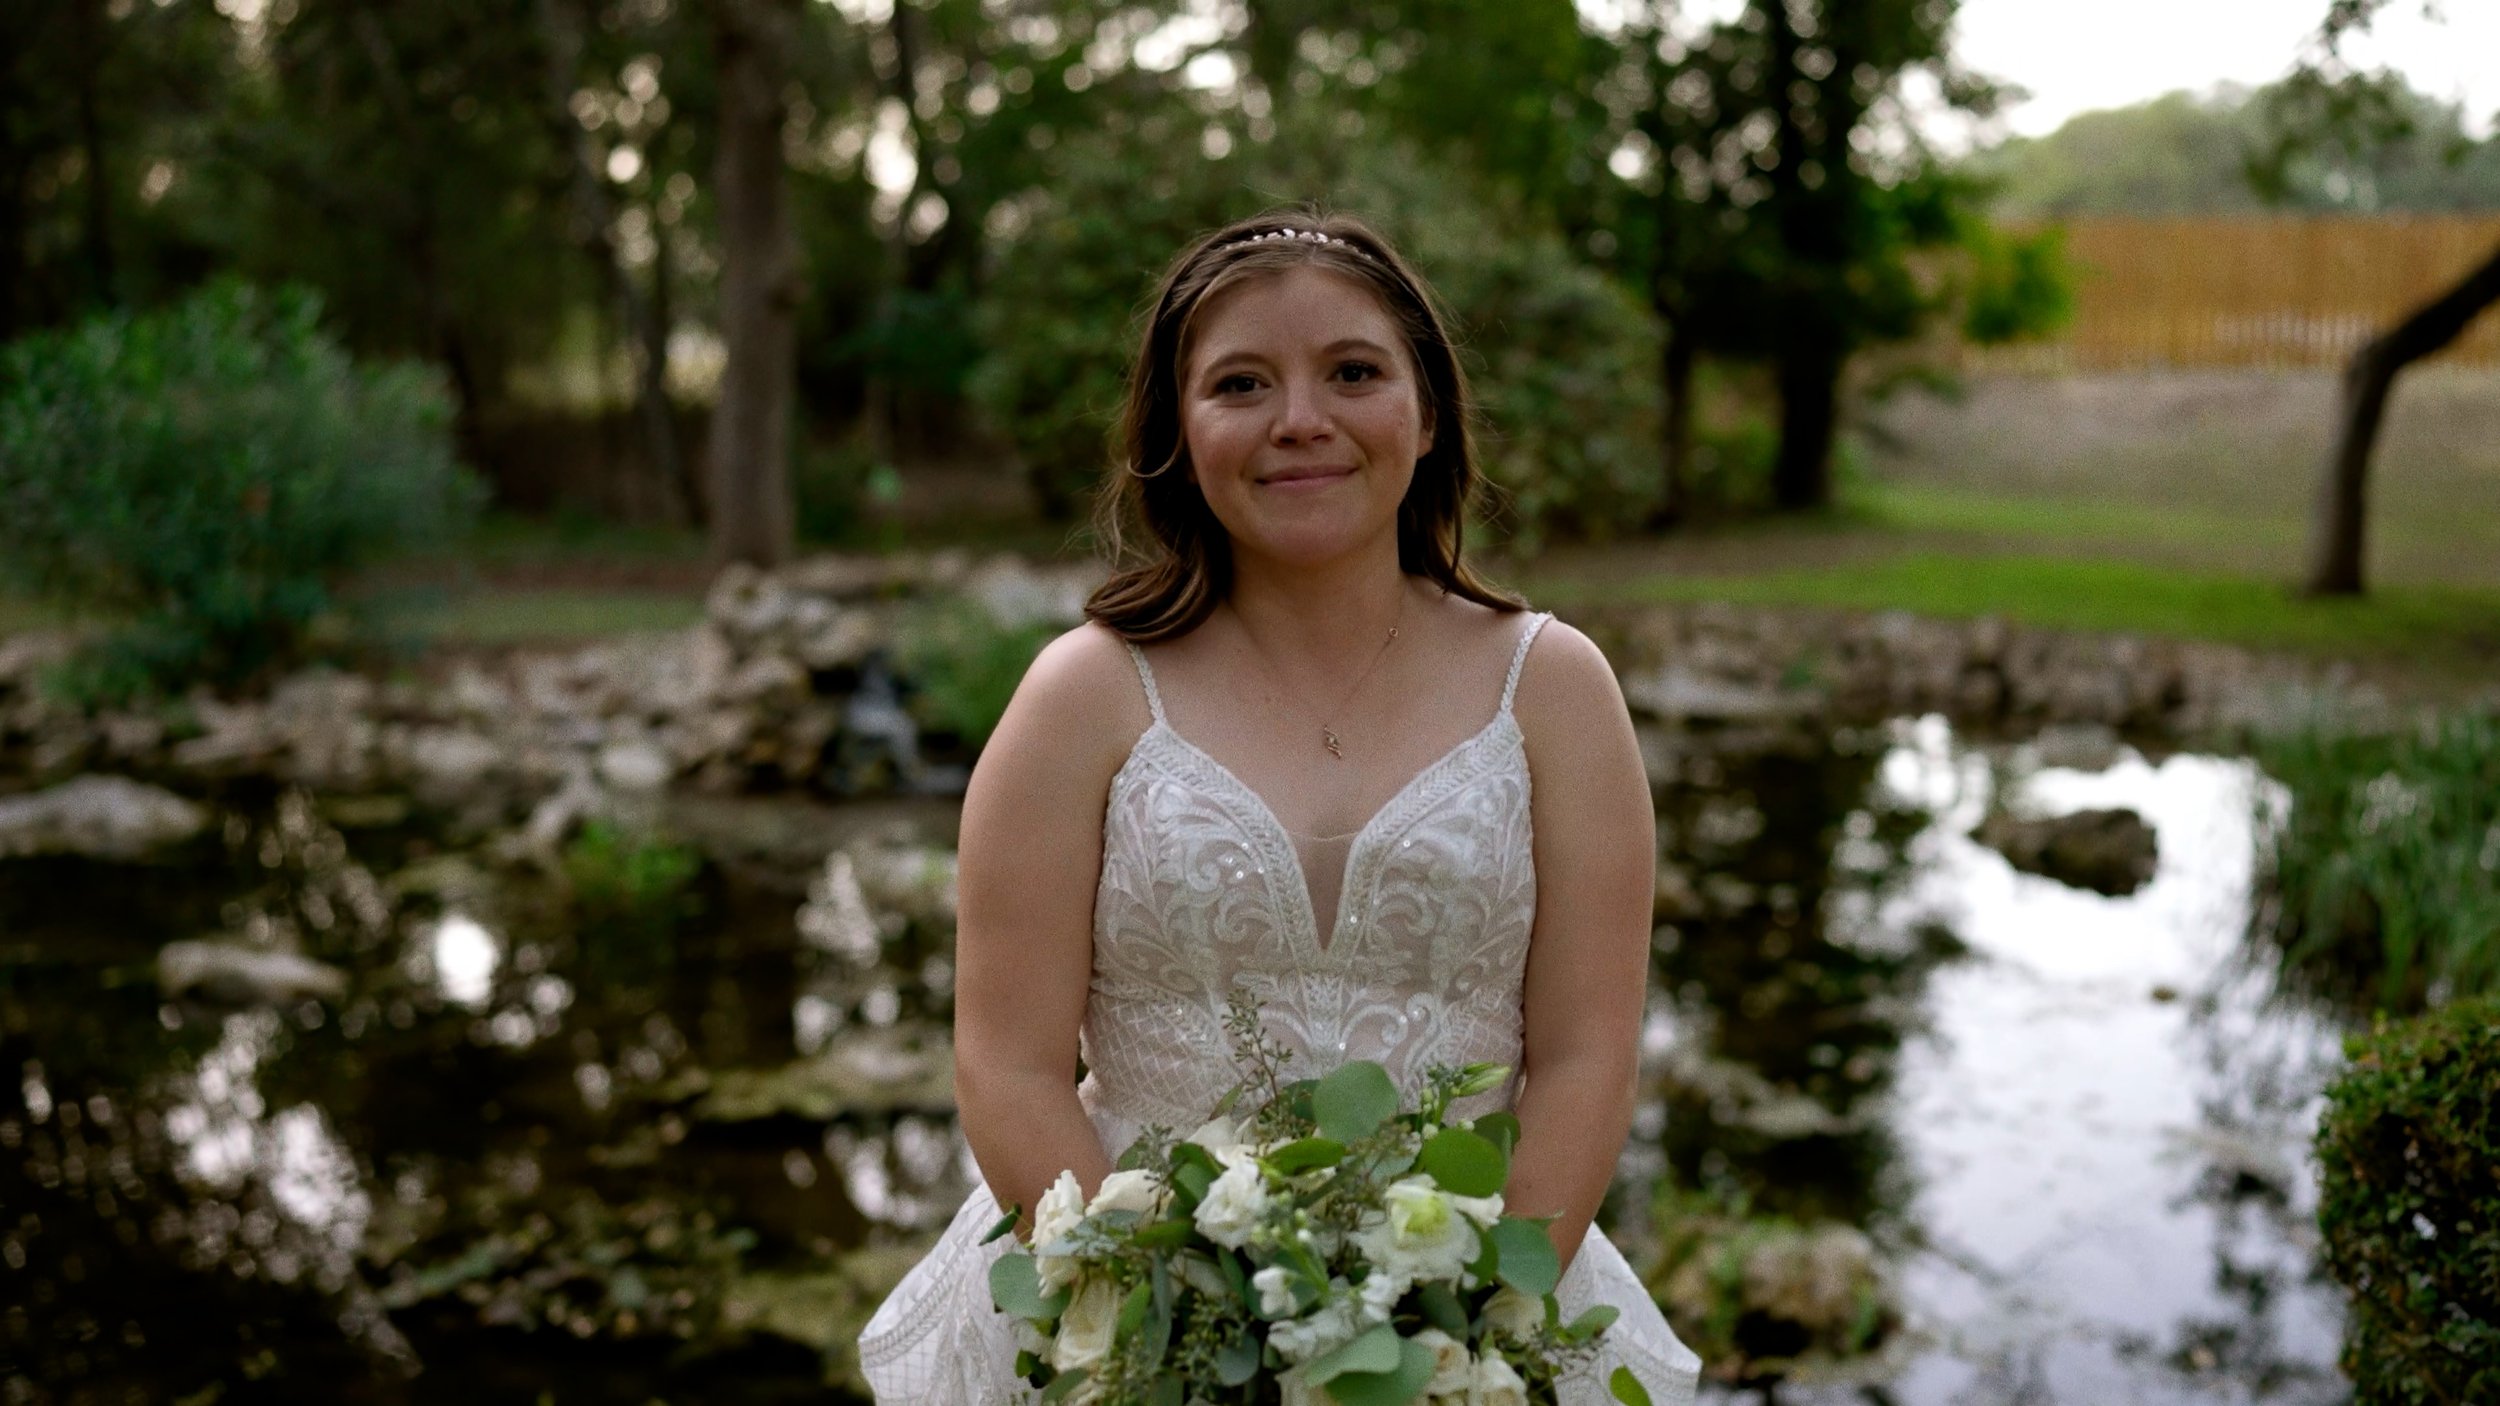 bride soft smiles at camera holding bouquet in wedding dress outside next to pond